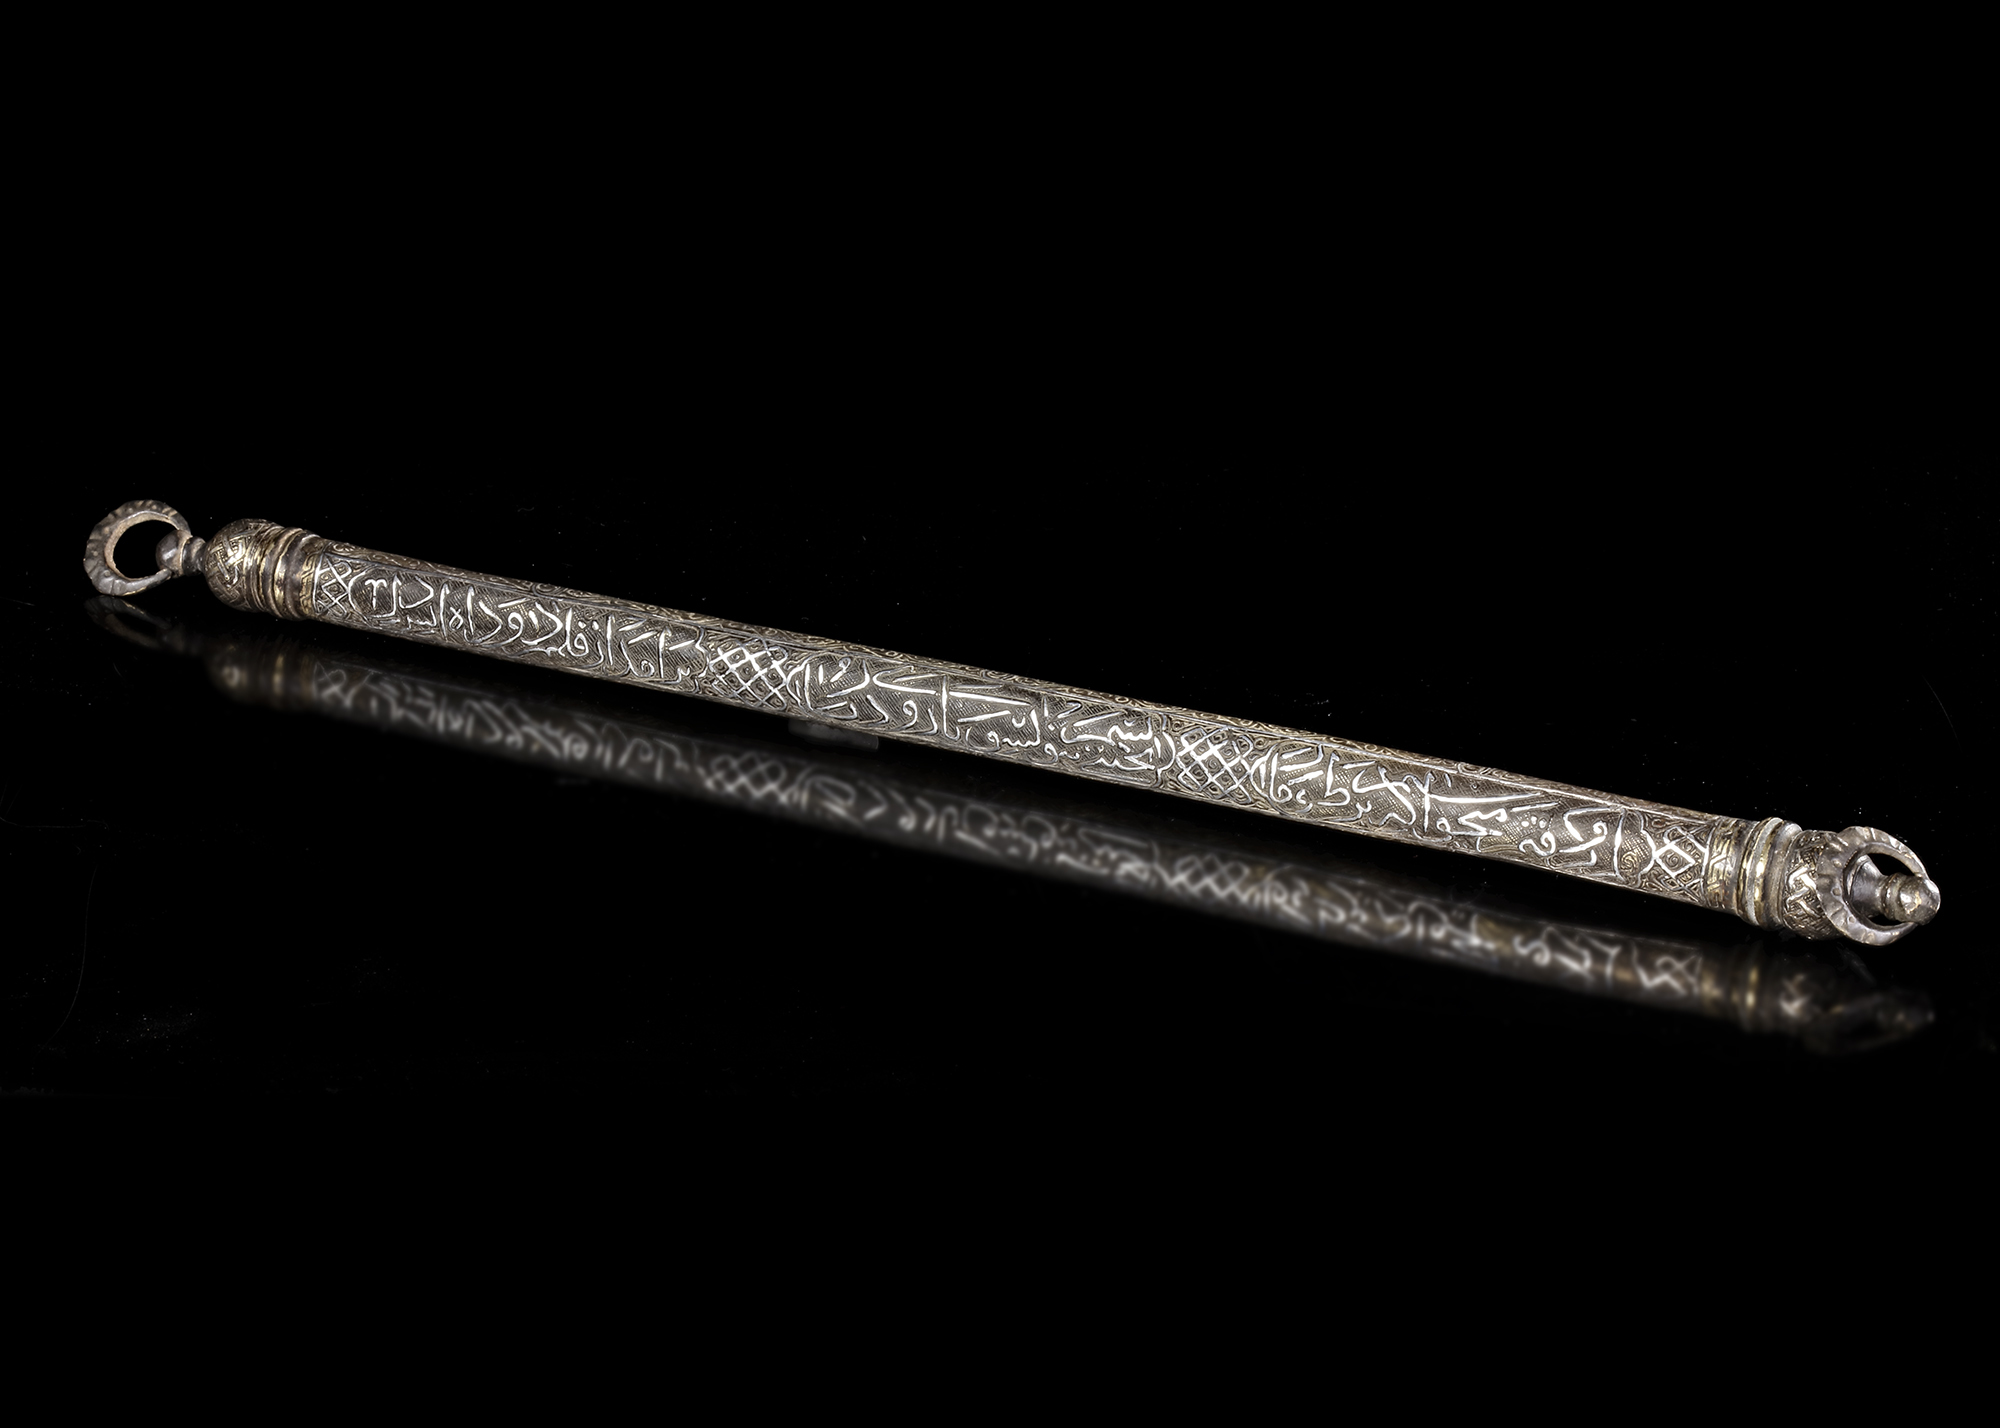 A TIMURID SILVER INLAID BRONZE SCROLL HOLDER, 14TH/15TH CENTURY - Image 4 of 7